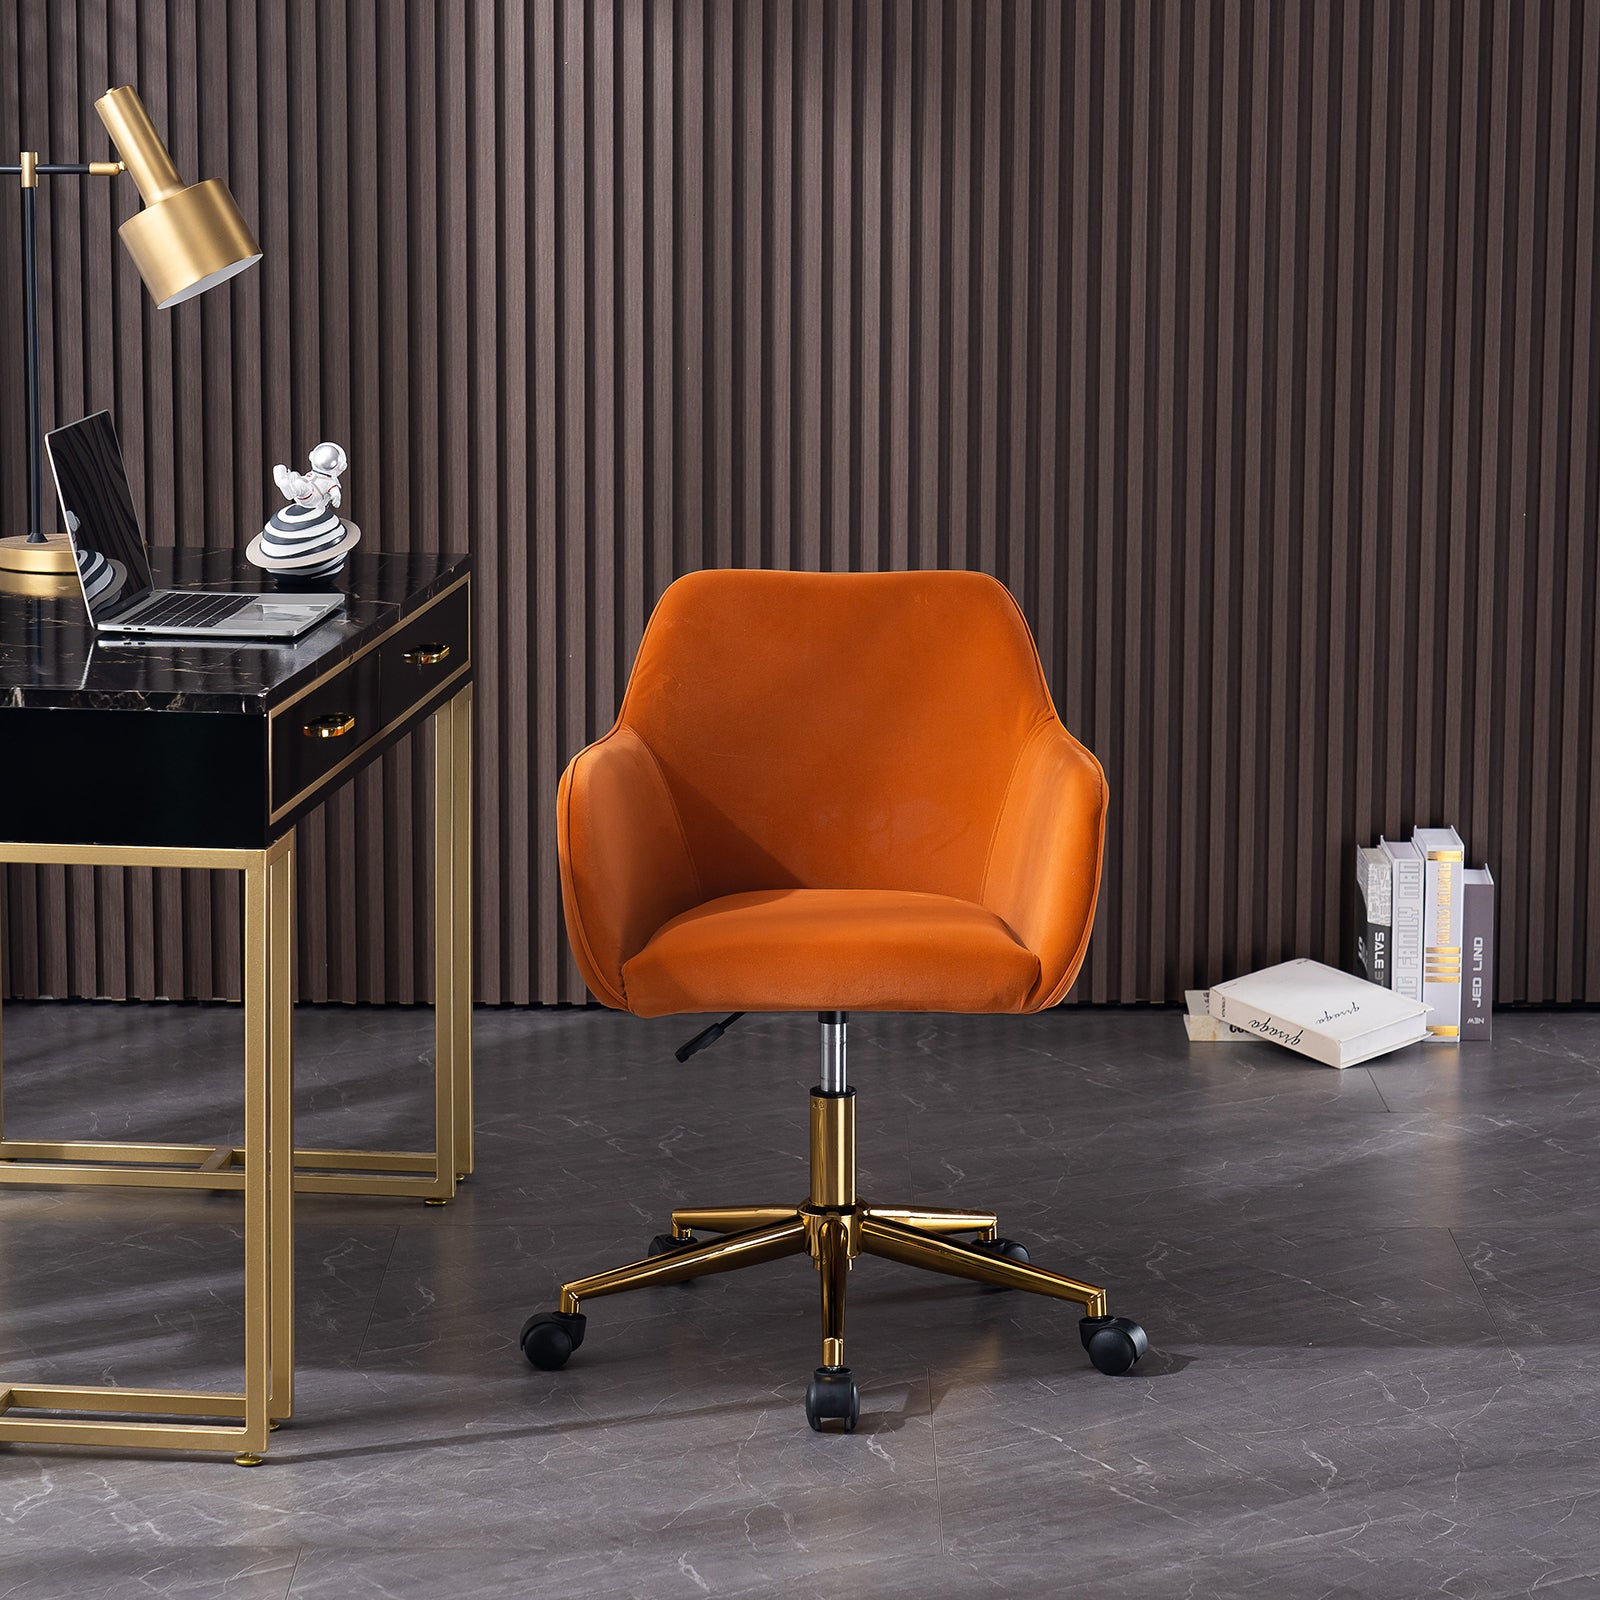 Home Office Chair with Gold Metal Legs and Universal Wheels - Orange